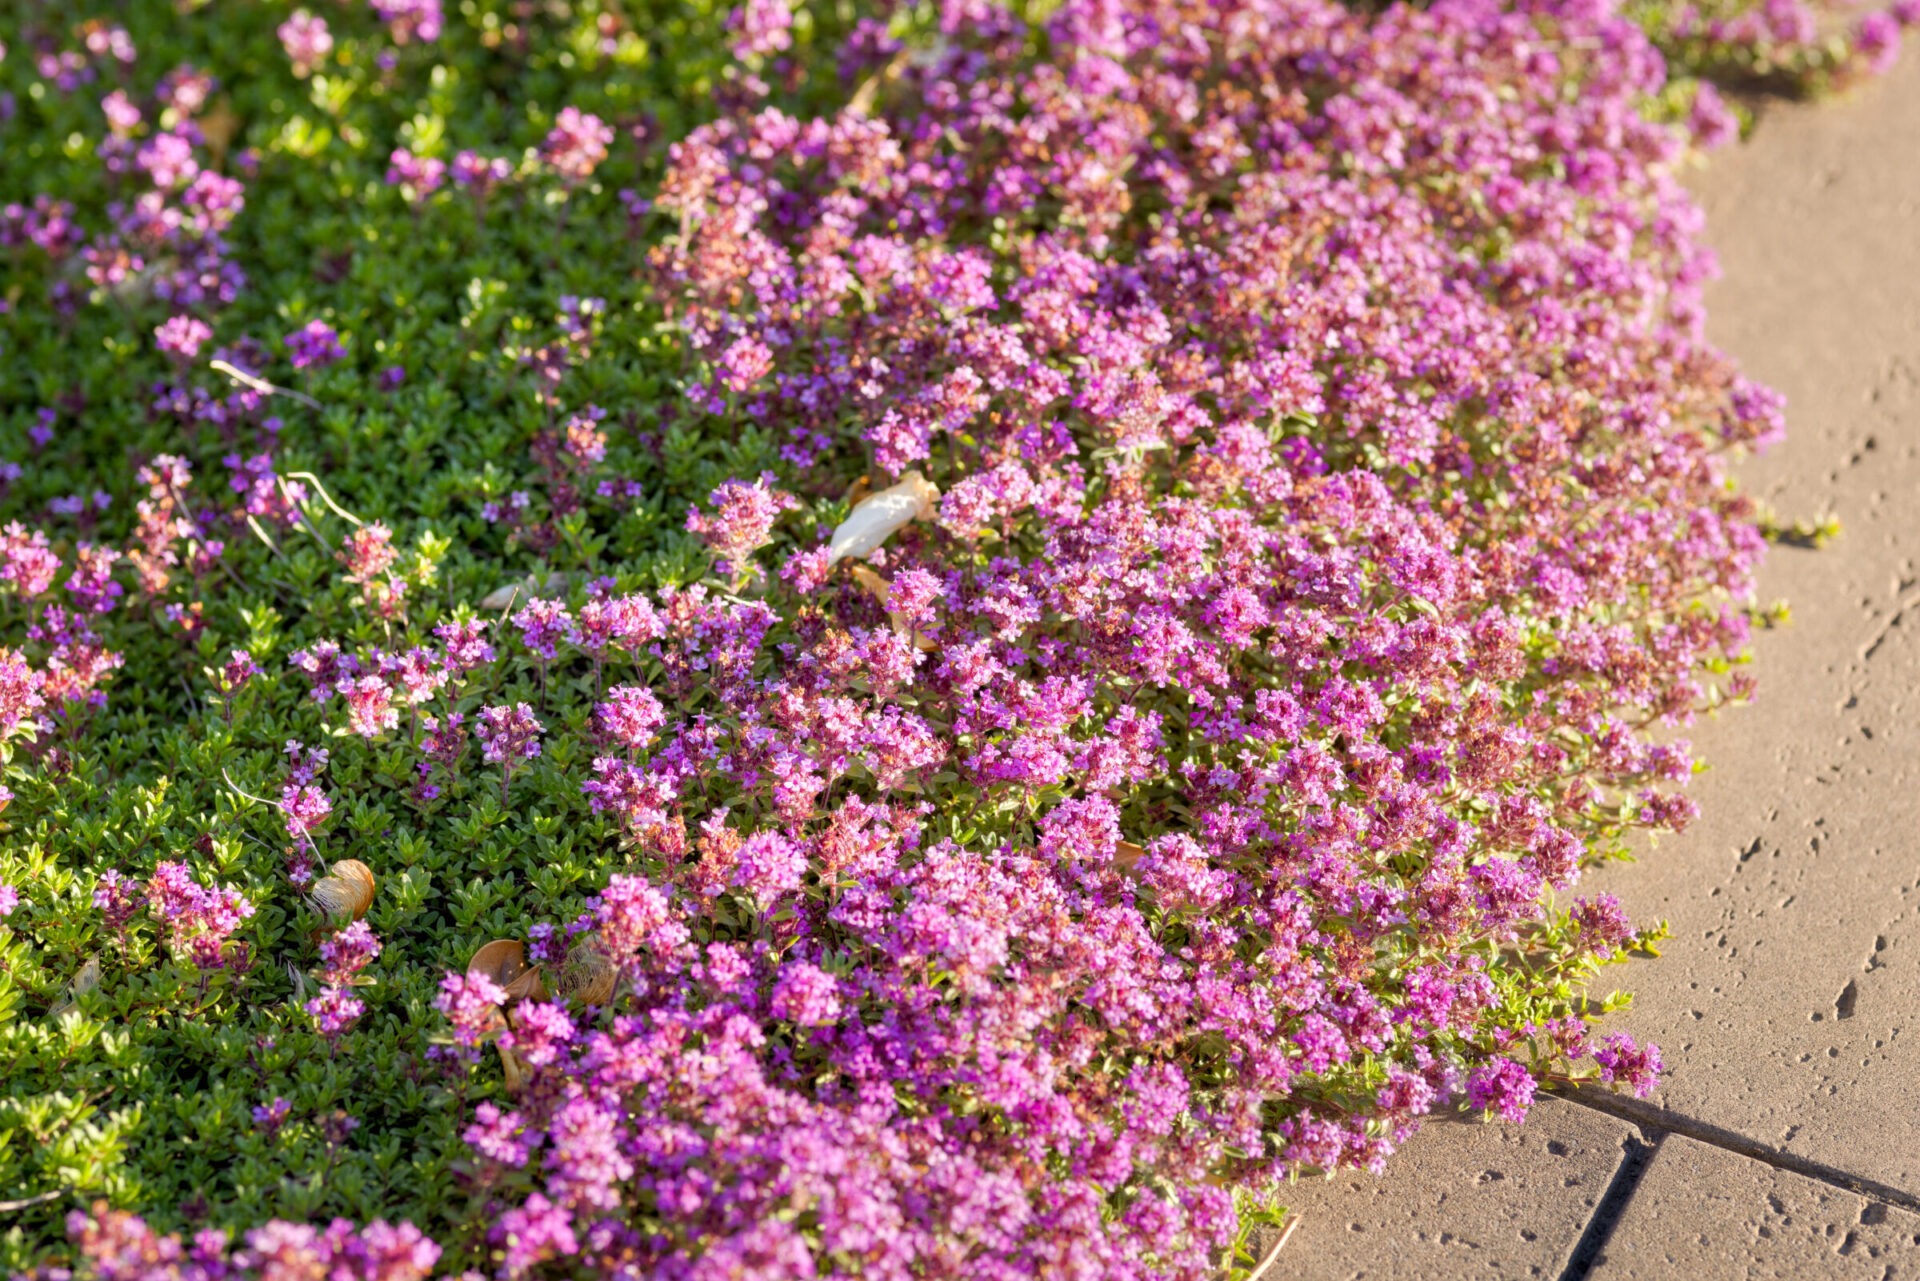 This image shows a bed of bright purple flowers beside a concrete path, with sunlight casting shadows, and two snails visible among the blossoms.